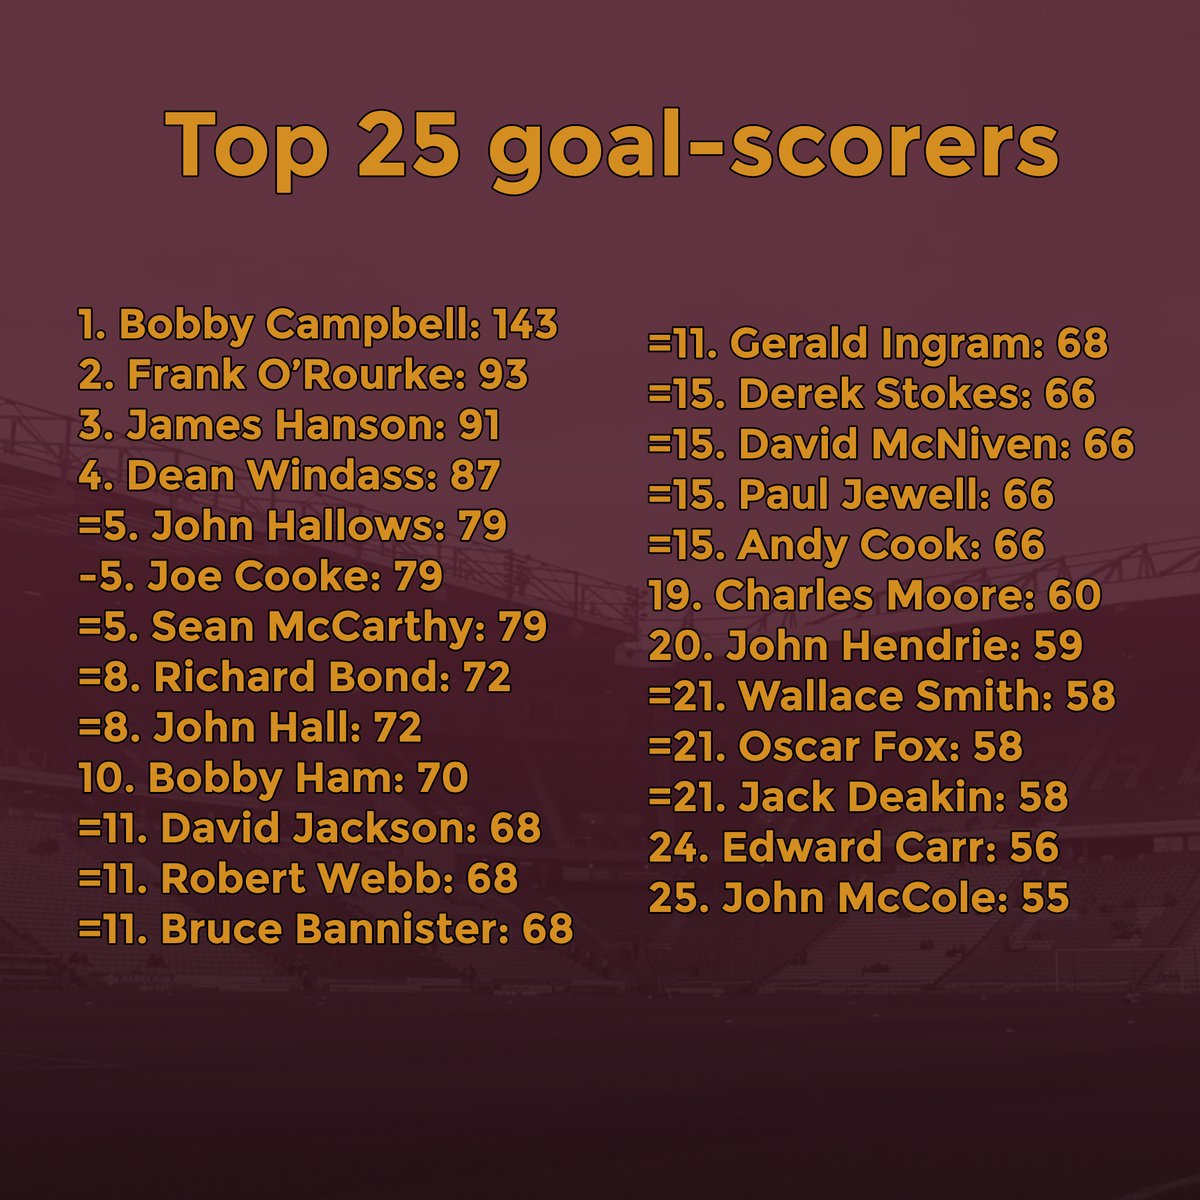 Bradford City goal number 66 for our number 9⃣ tonight - which brings up another huge milestone. Andy Cook is now joint-15th on the @officialbantams all-time top-scorers list, level with Derek Stokes, David McNiven and Paul Jewell. Just four goals away from the top ten. #bcafc